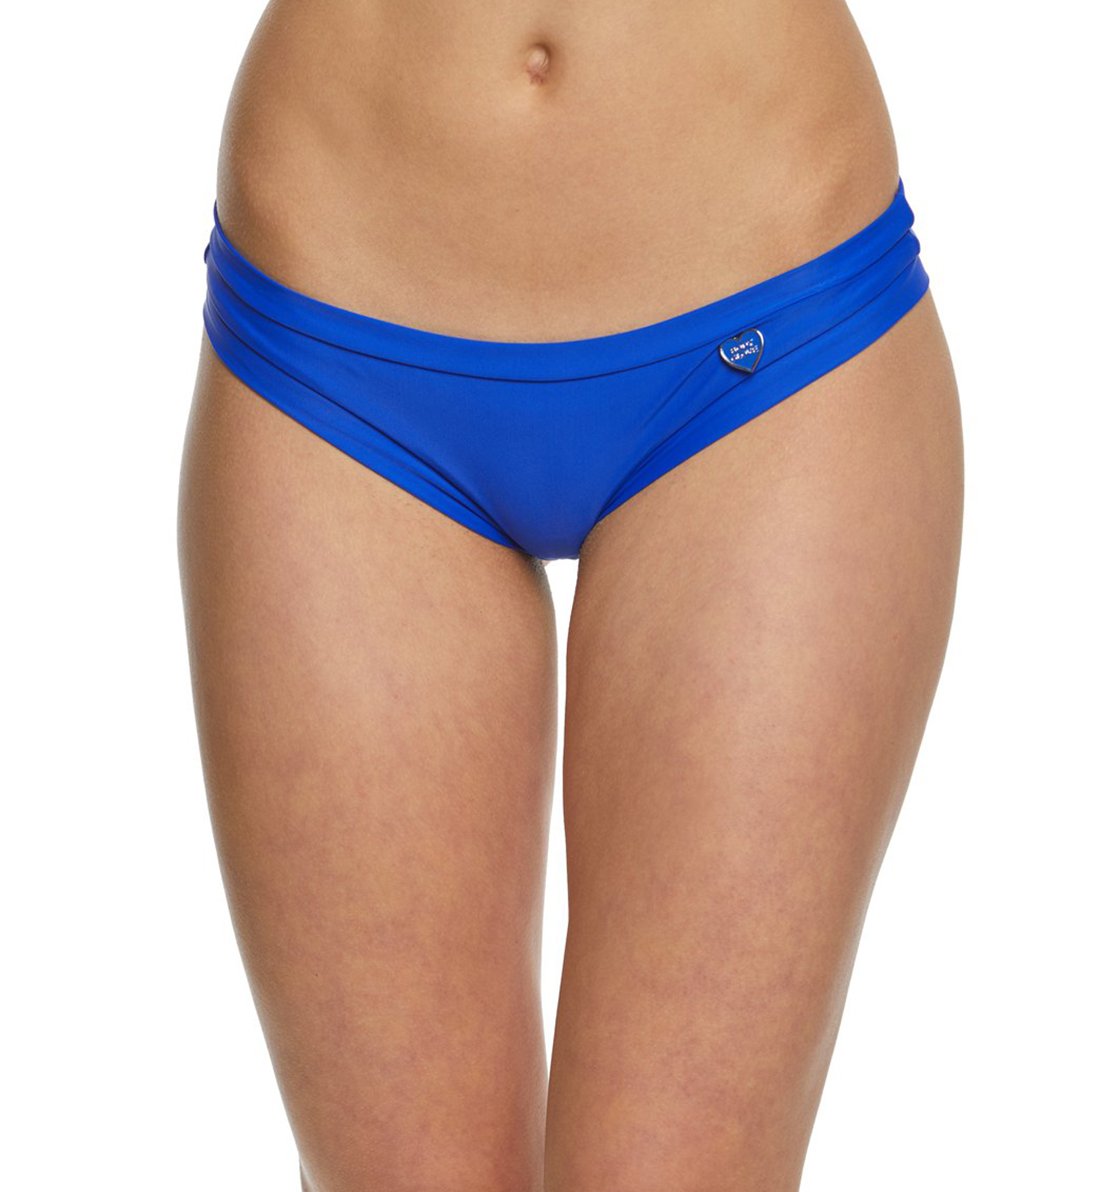 Body Glove Smoothies Audrey Banded Bikini Brief (3950648),XS,Abyss - Abyss,XS